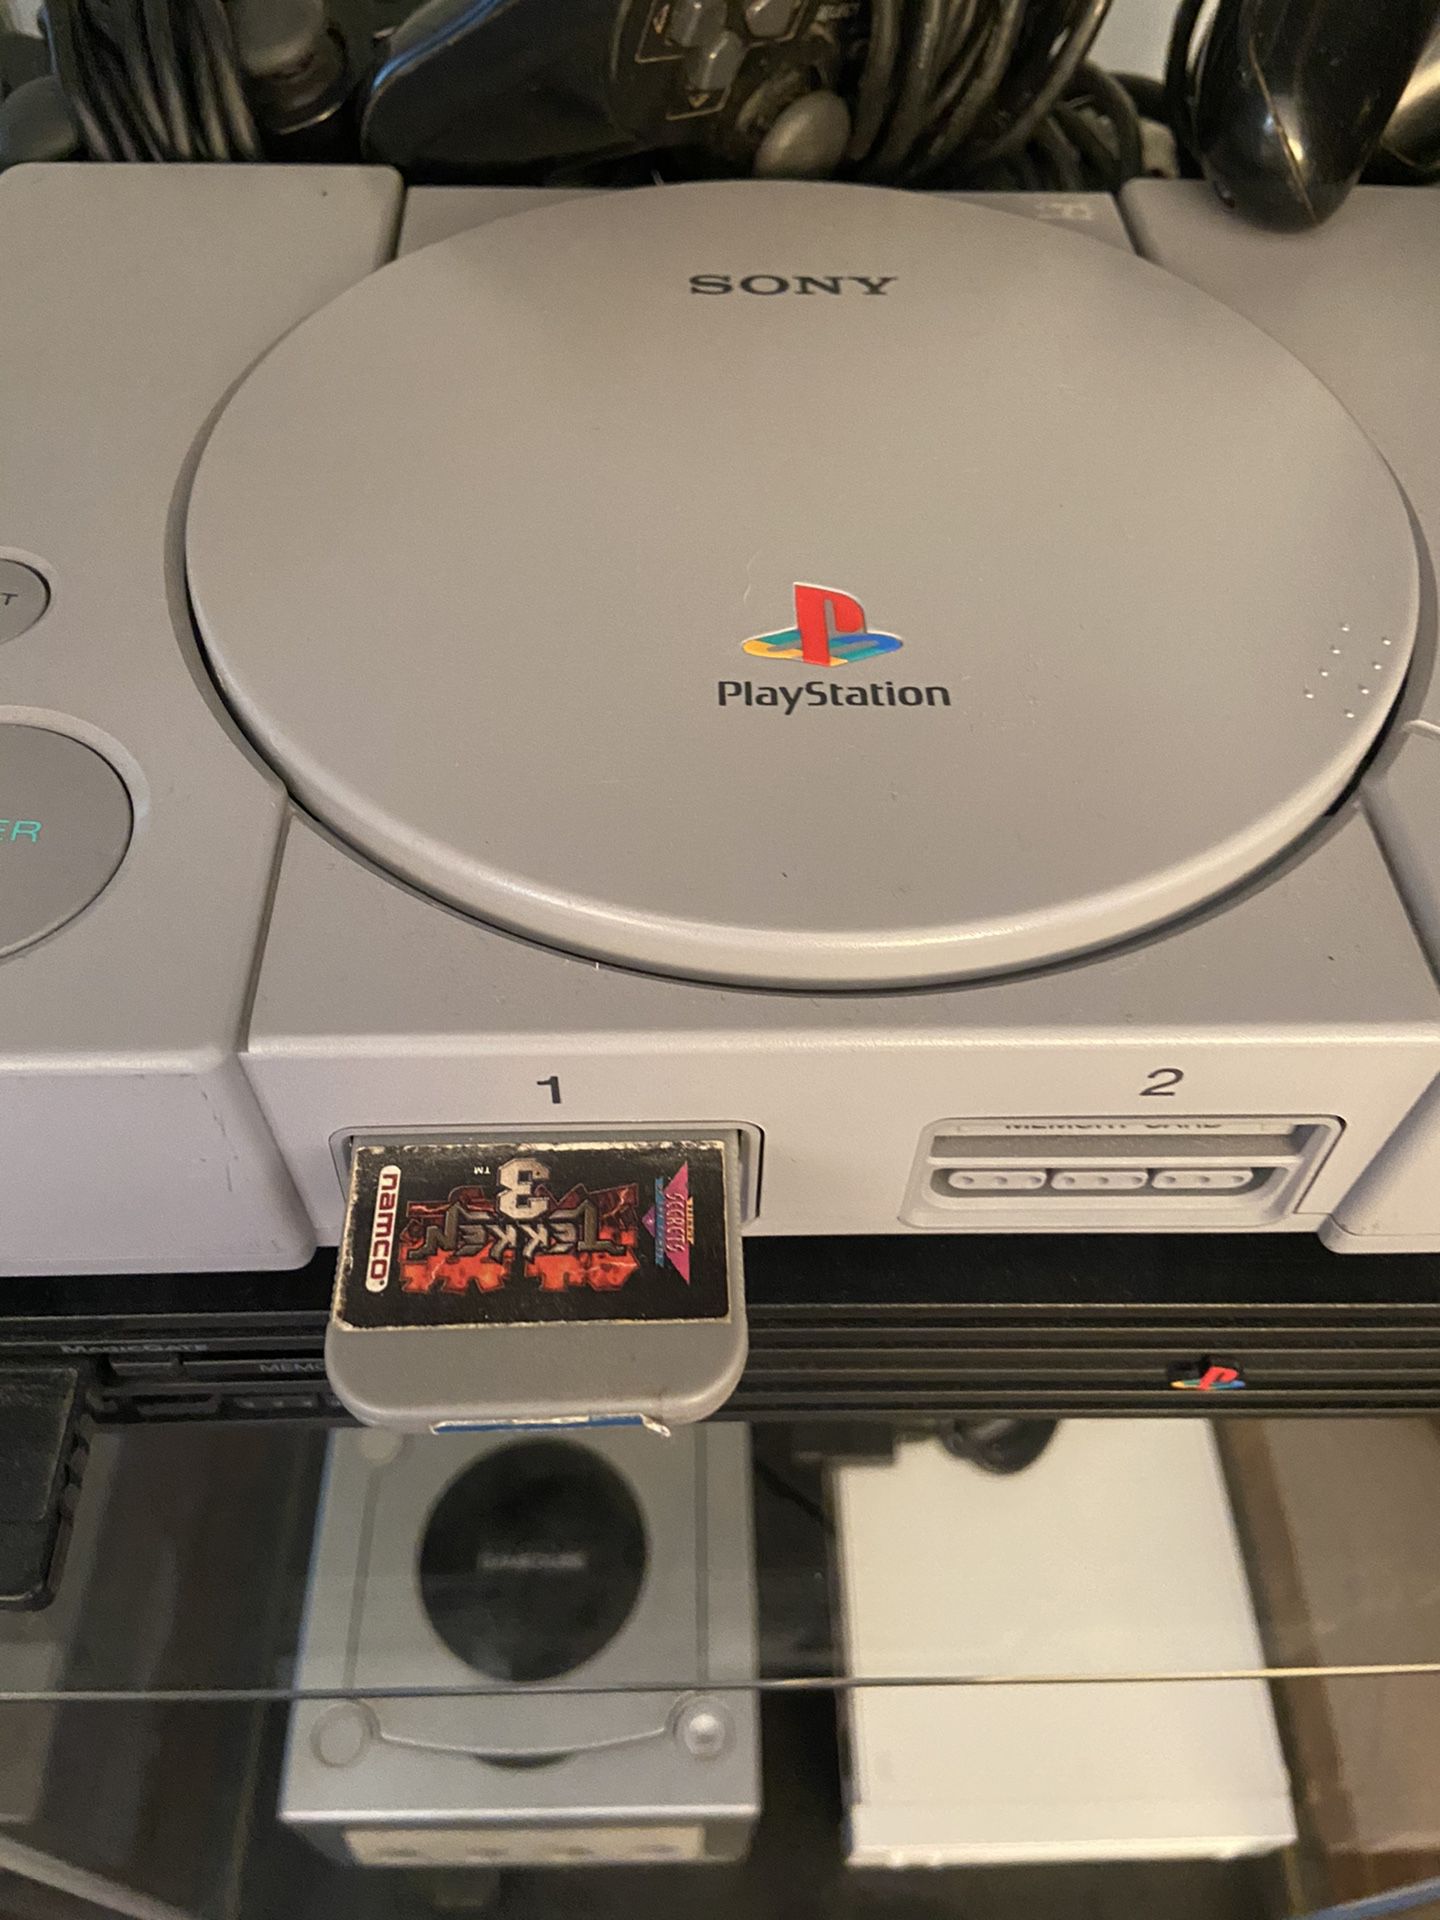 PlayStation ps1 with cords and remotes